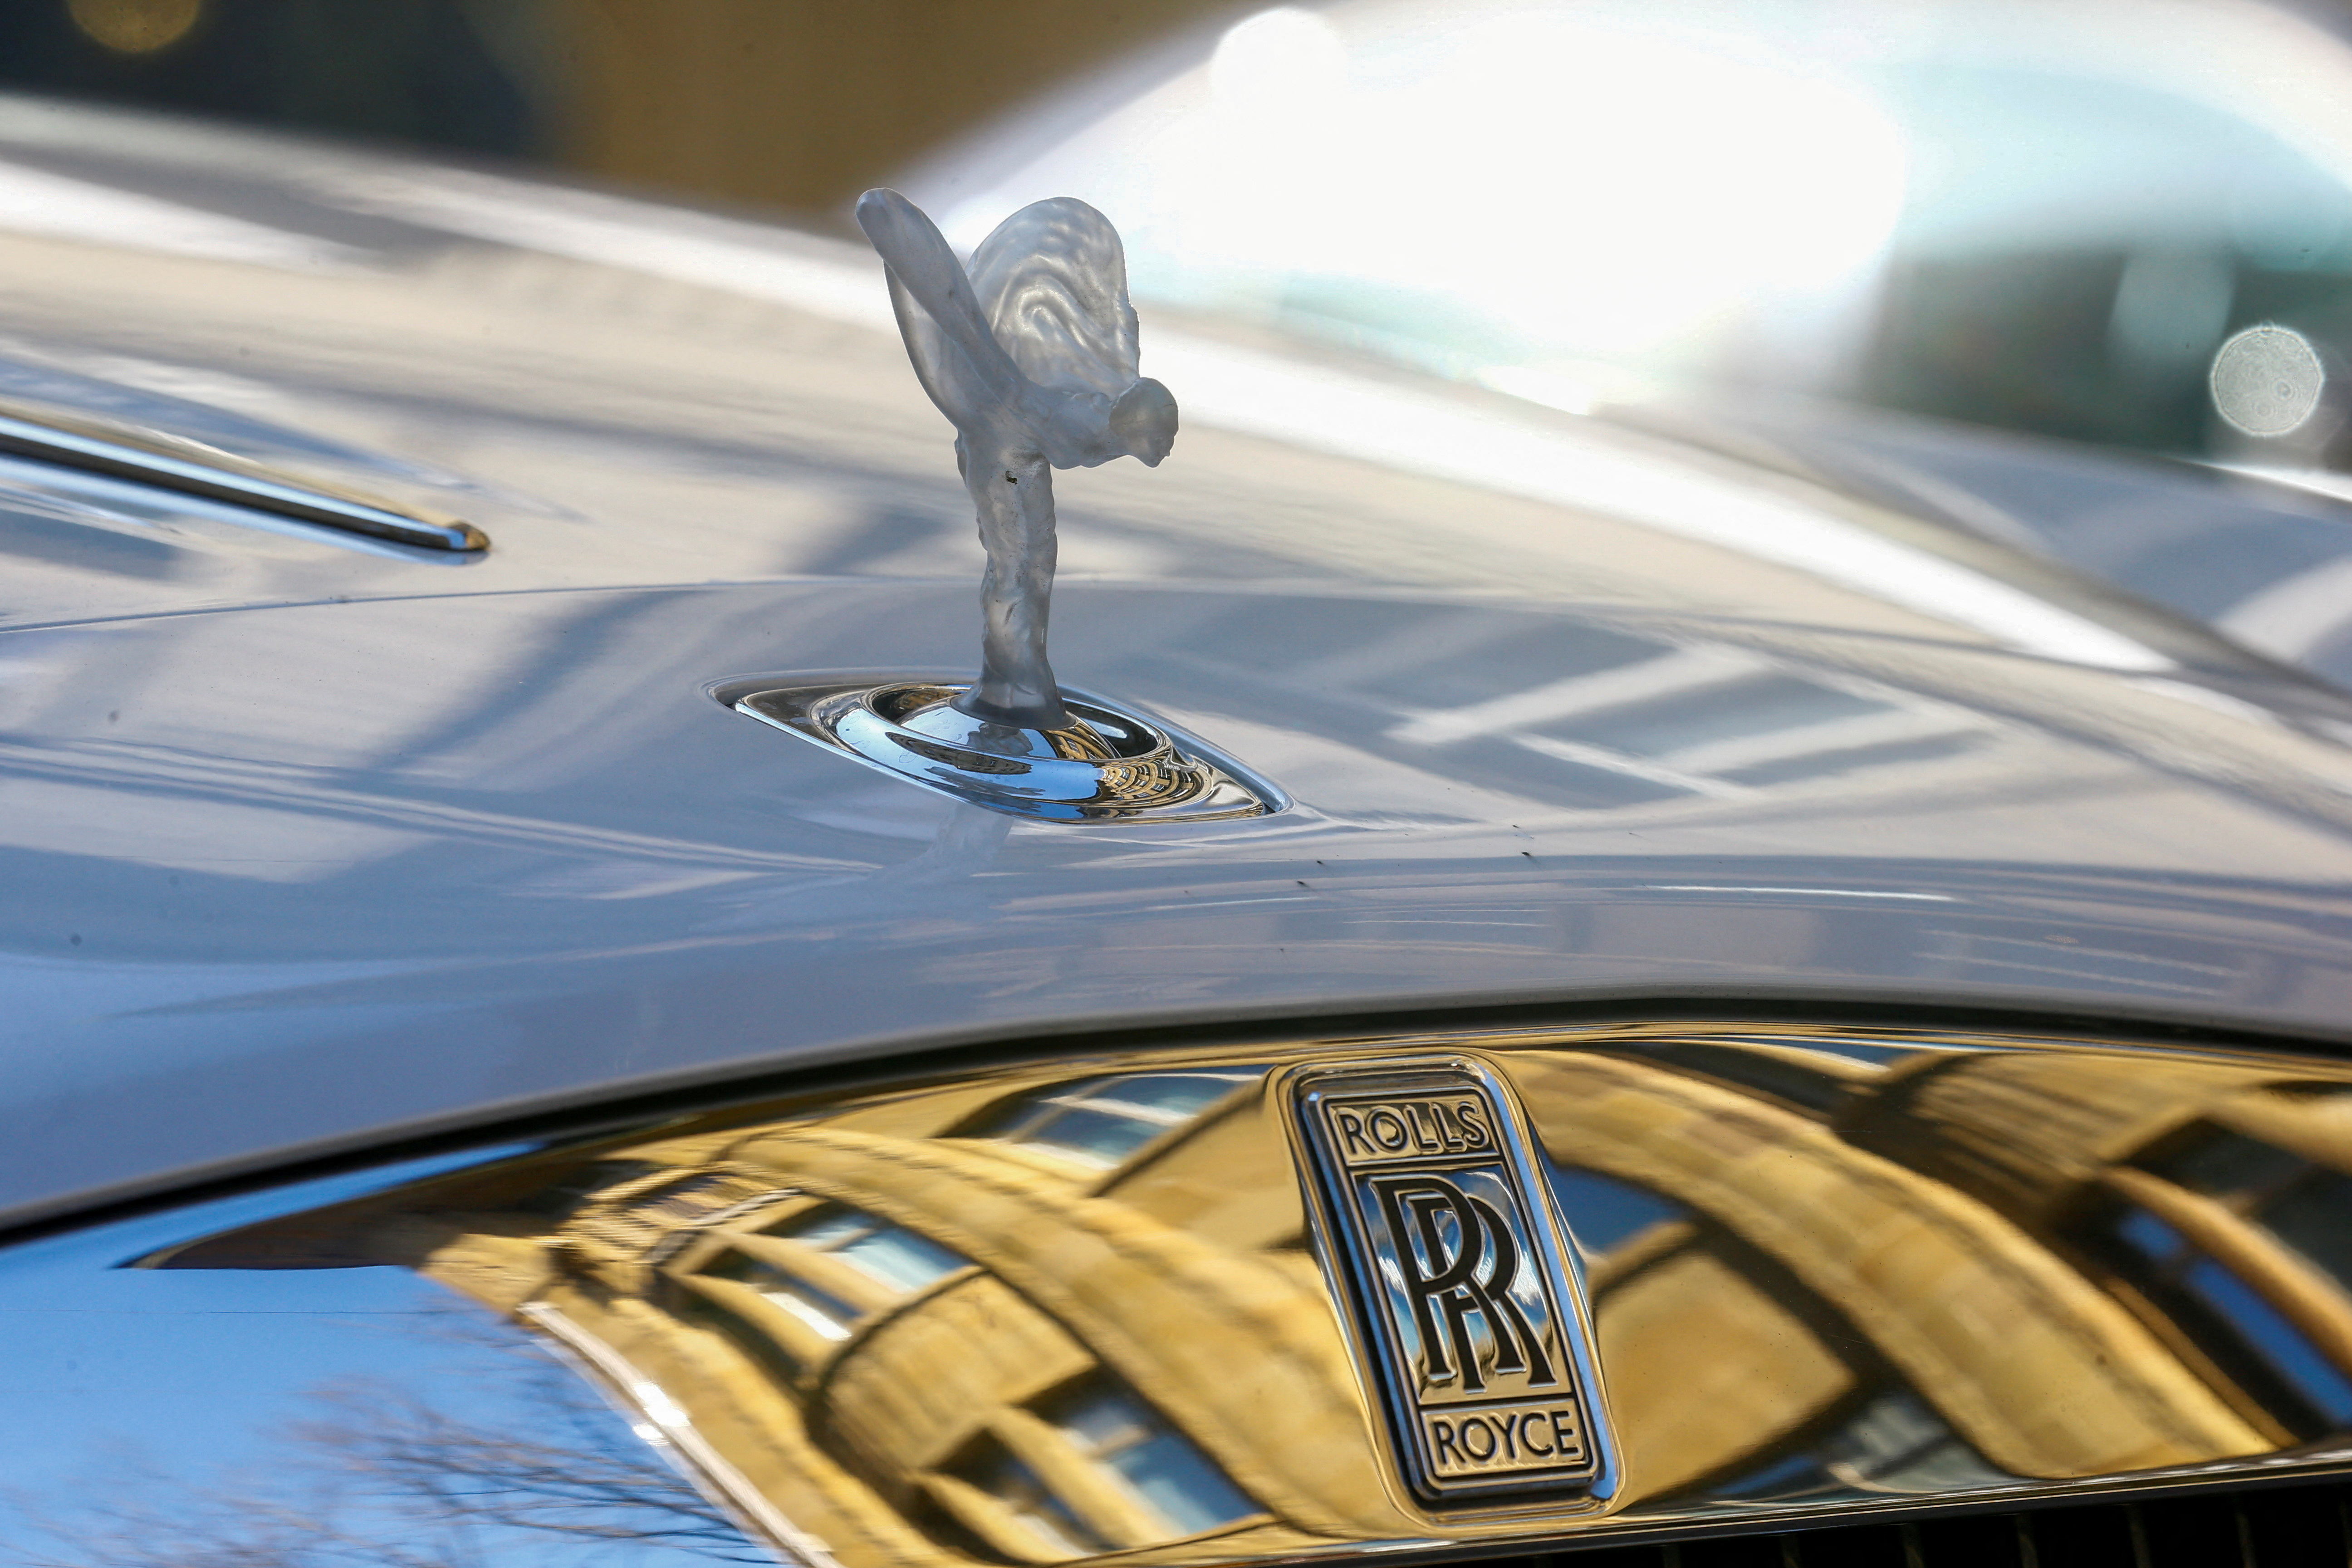 FILE PHOTO: The mascot, the so-called 'Spirit of Ecstasy' or 'Emily', and the company logo are seen on the bonnet of a Rolls-Royce car in Zurich, Switzerland March 30, 2021. REUTERS/Arnd Wiegmann/File Photos